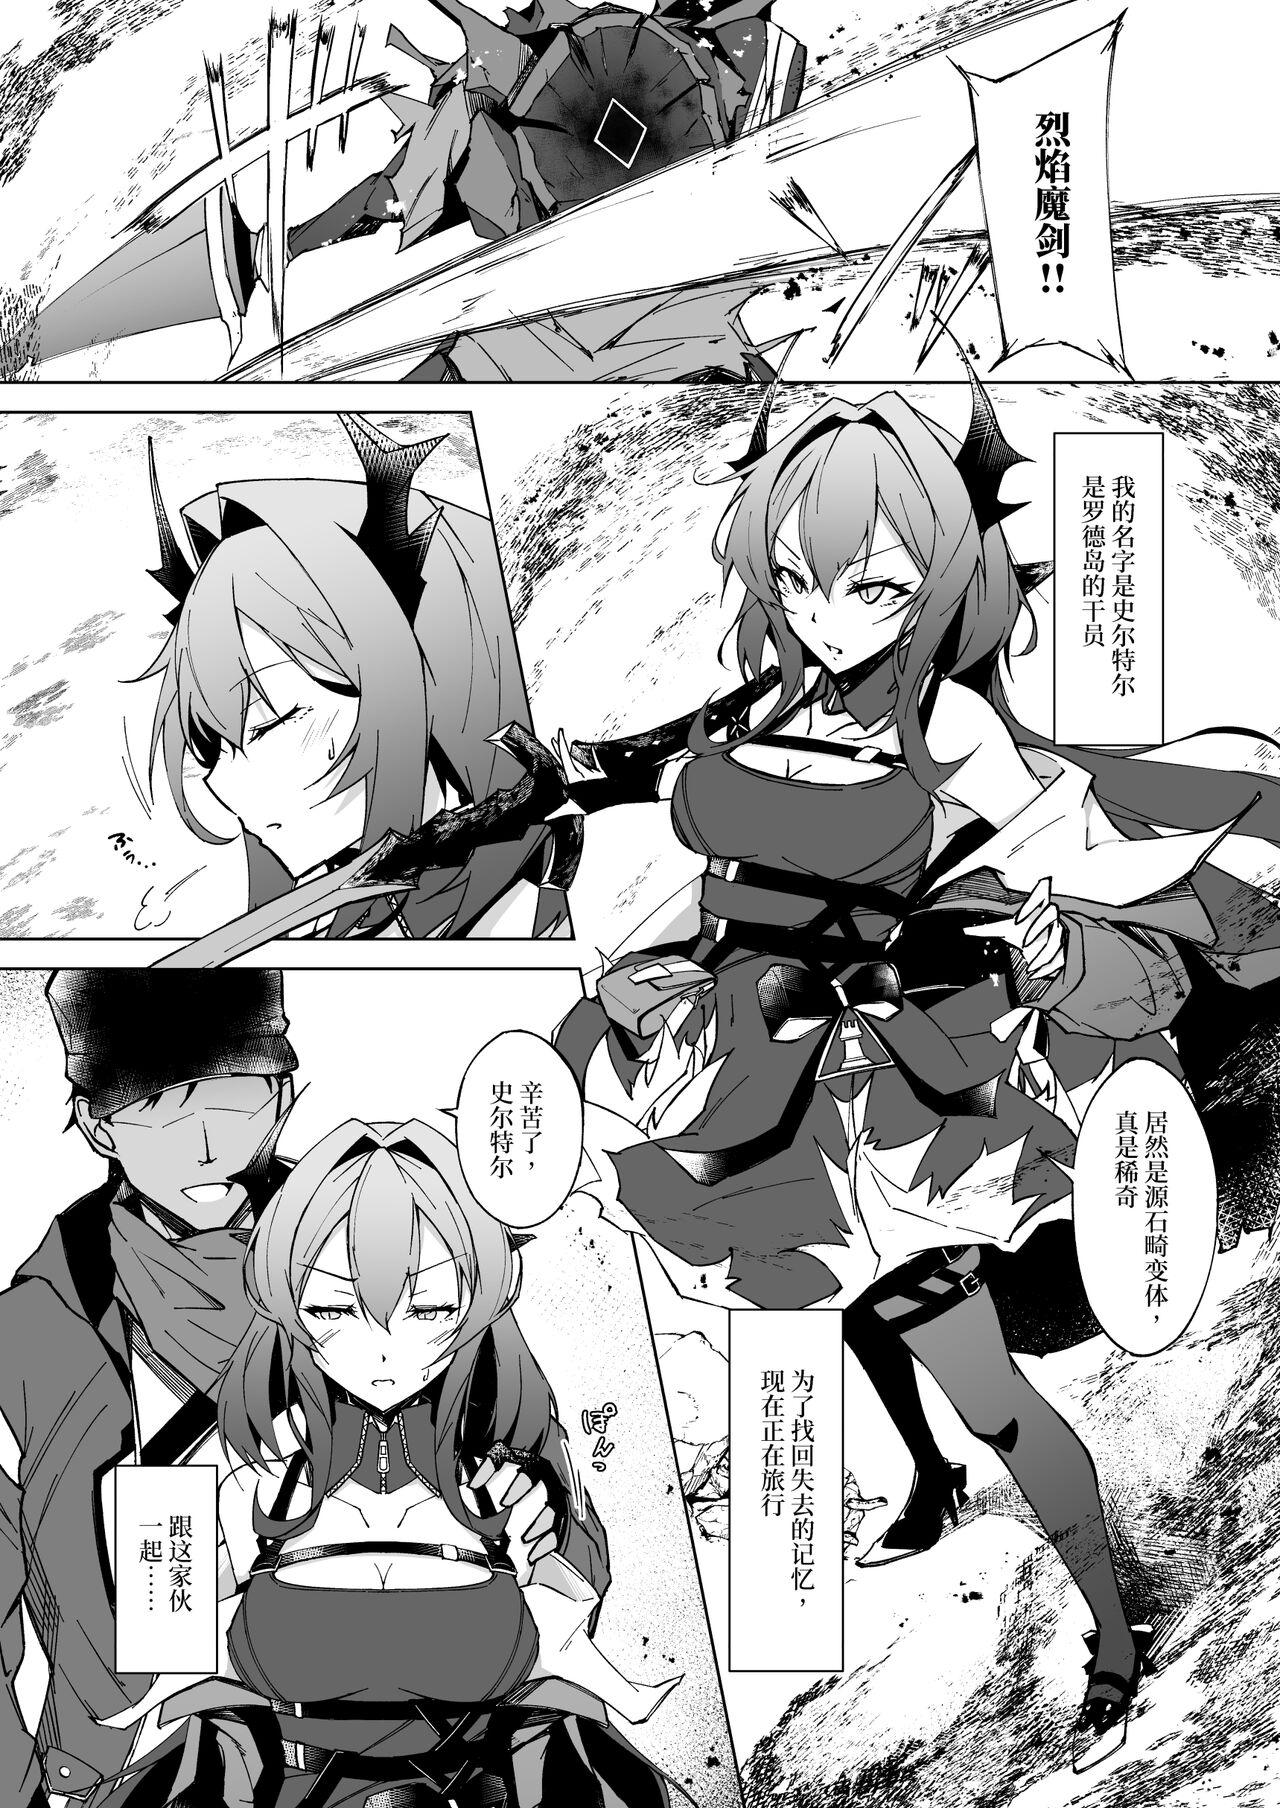 Cut Corruption Memories - Arknights Domina - Page 3